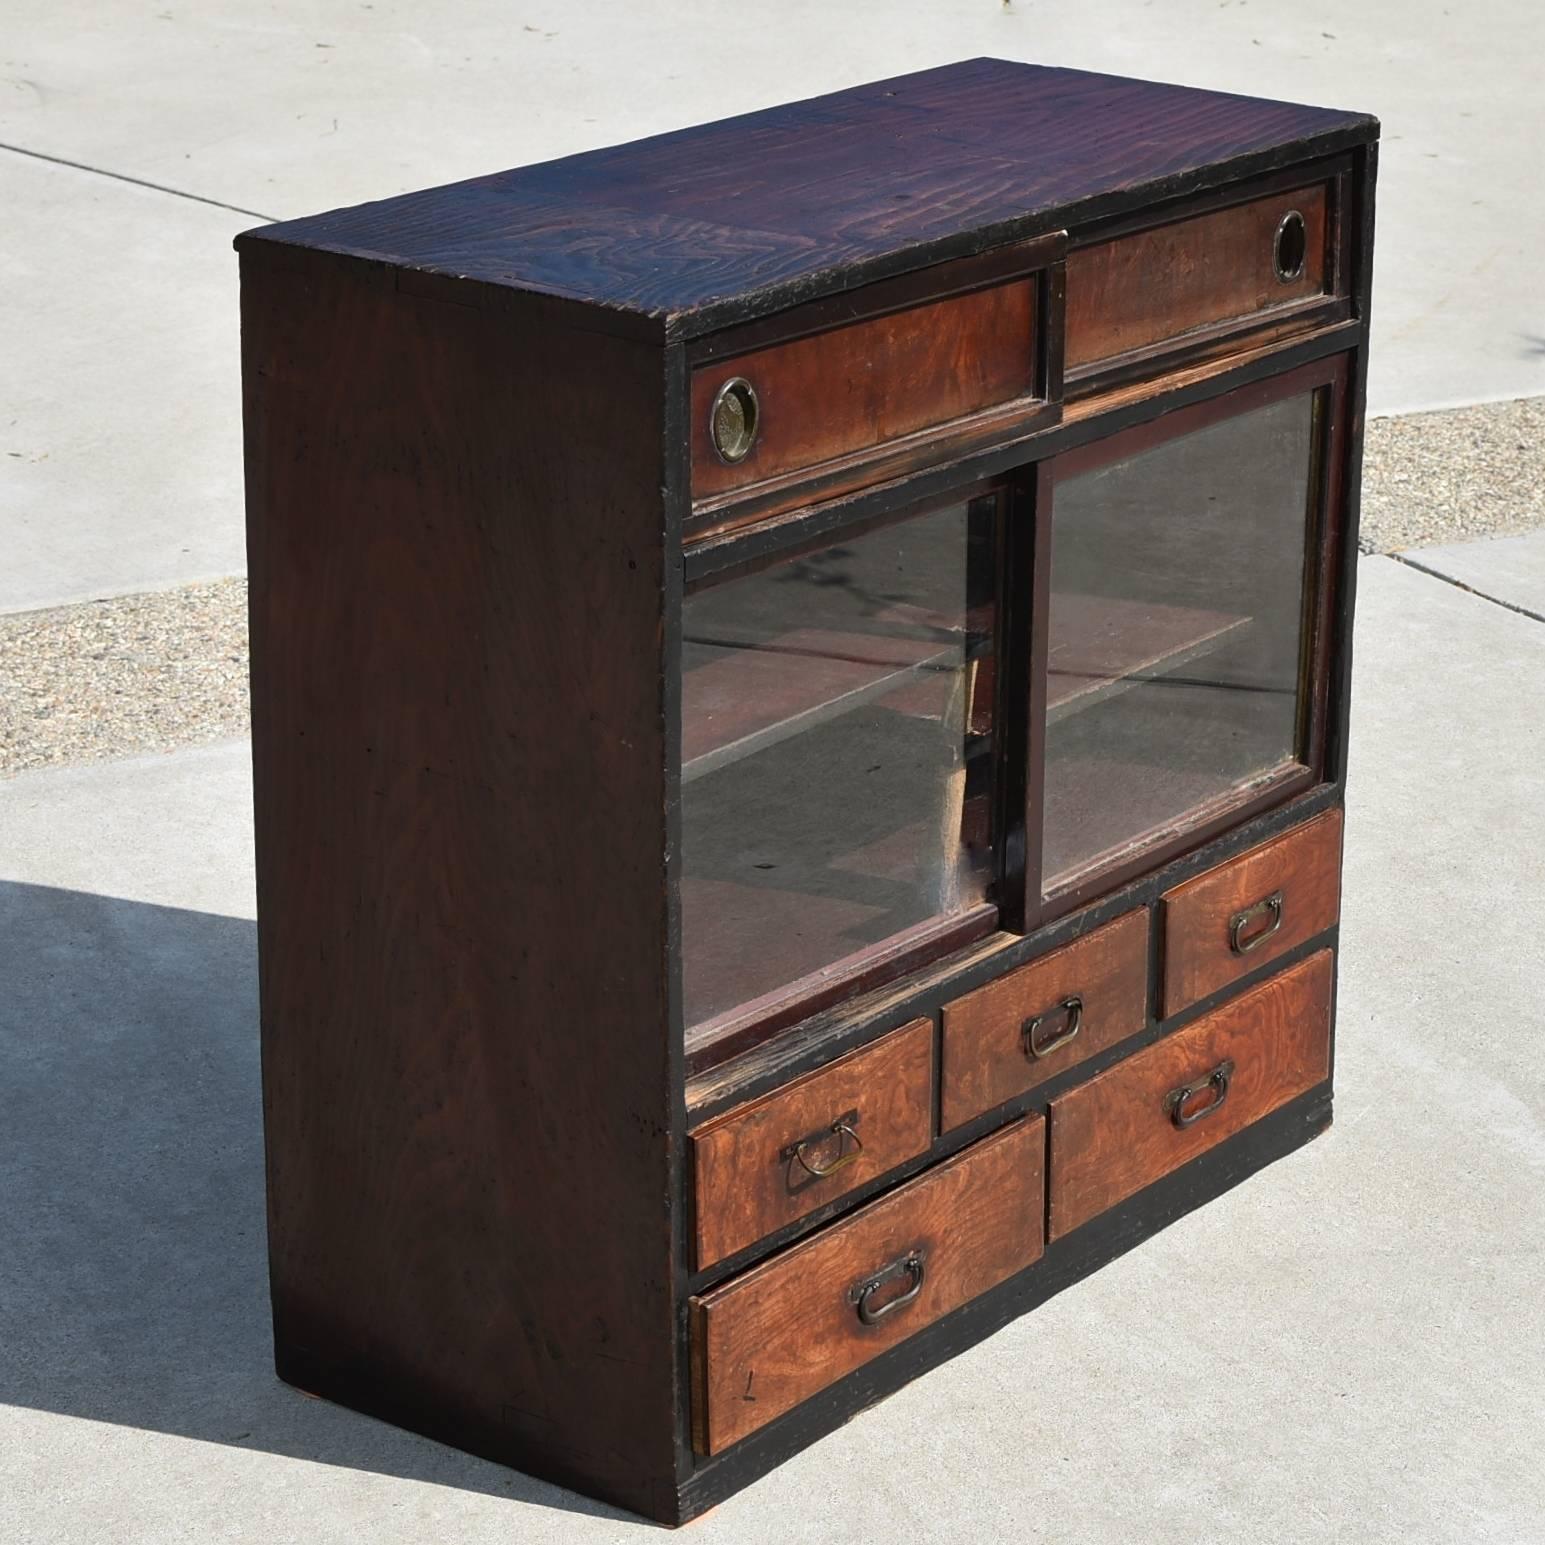 This beautiful chest, albeit its size, features five drawers, two shelves and a compartment behind sliding doors. Splendid burl wood make the drawer fronts while the Classic Japanese bronze hardware adorn the rest of the chest. The shelves are